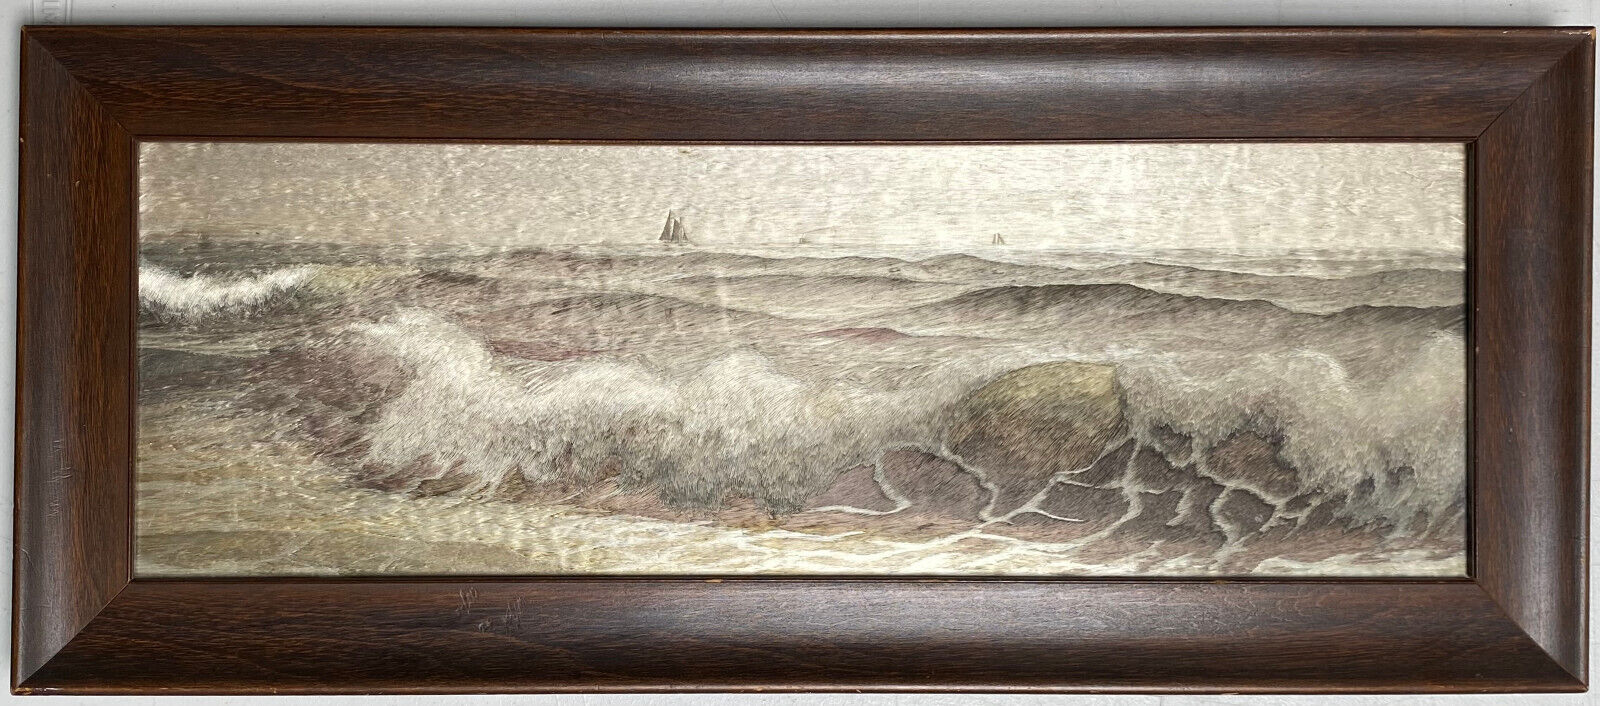 Antique Valuations: Antique Japanese Silk Embroidered Seascape “Painting” Nishimura Meiji 1900